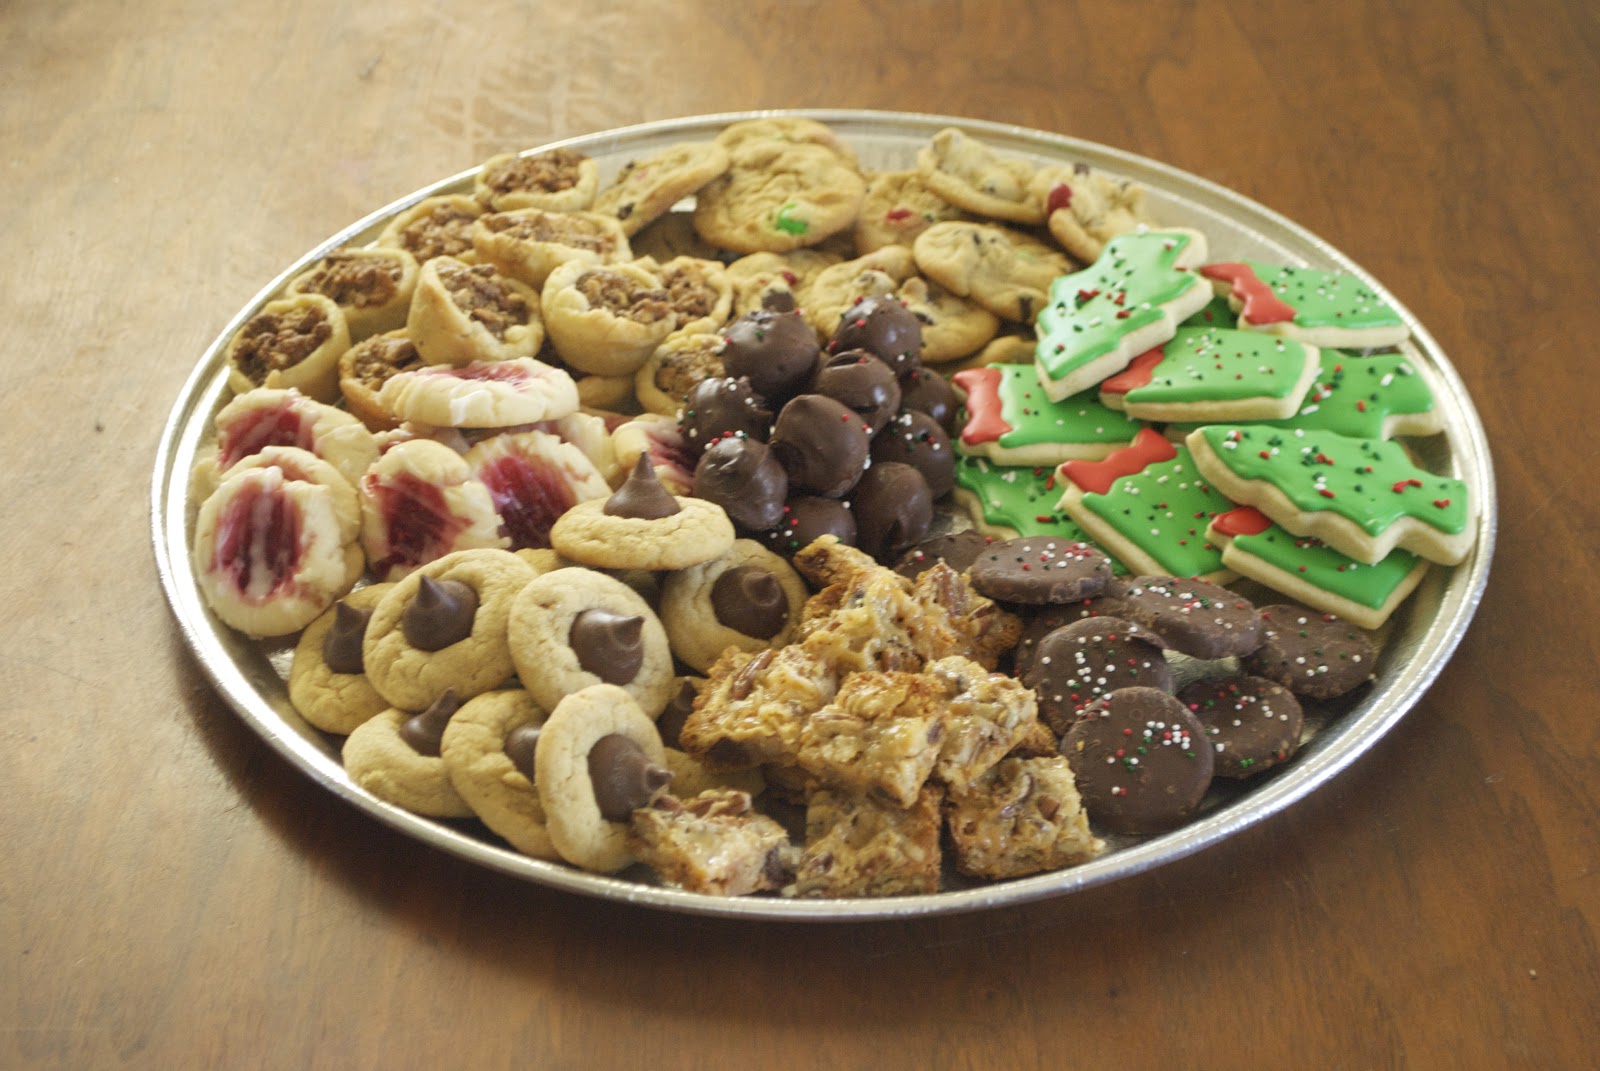 Country Cupboard Cakes: Christmas Cookies